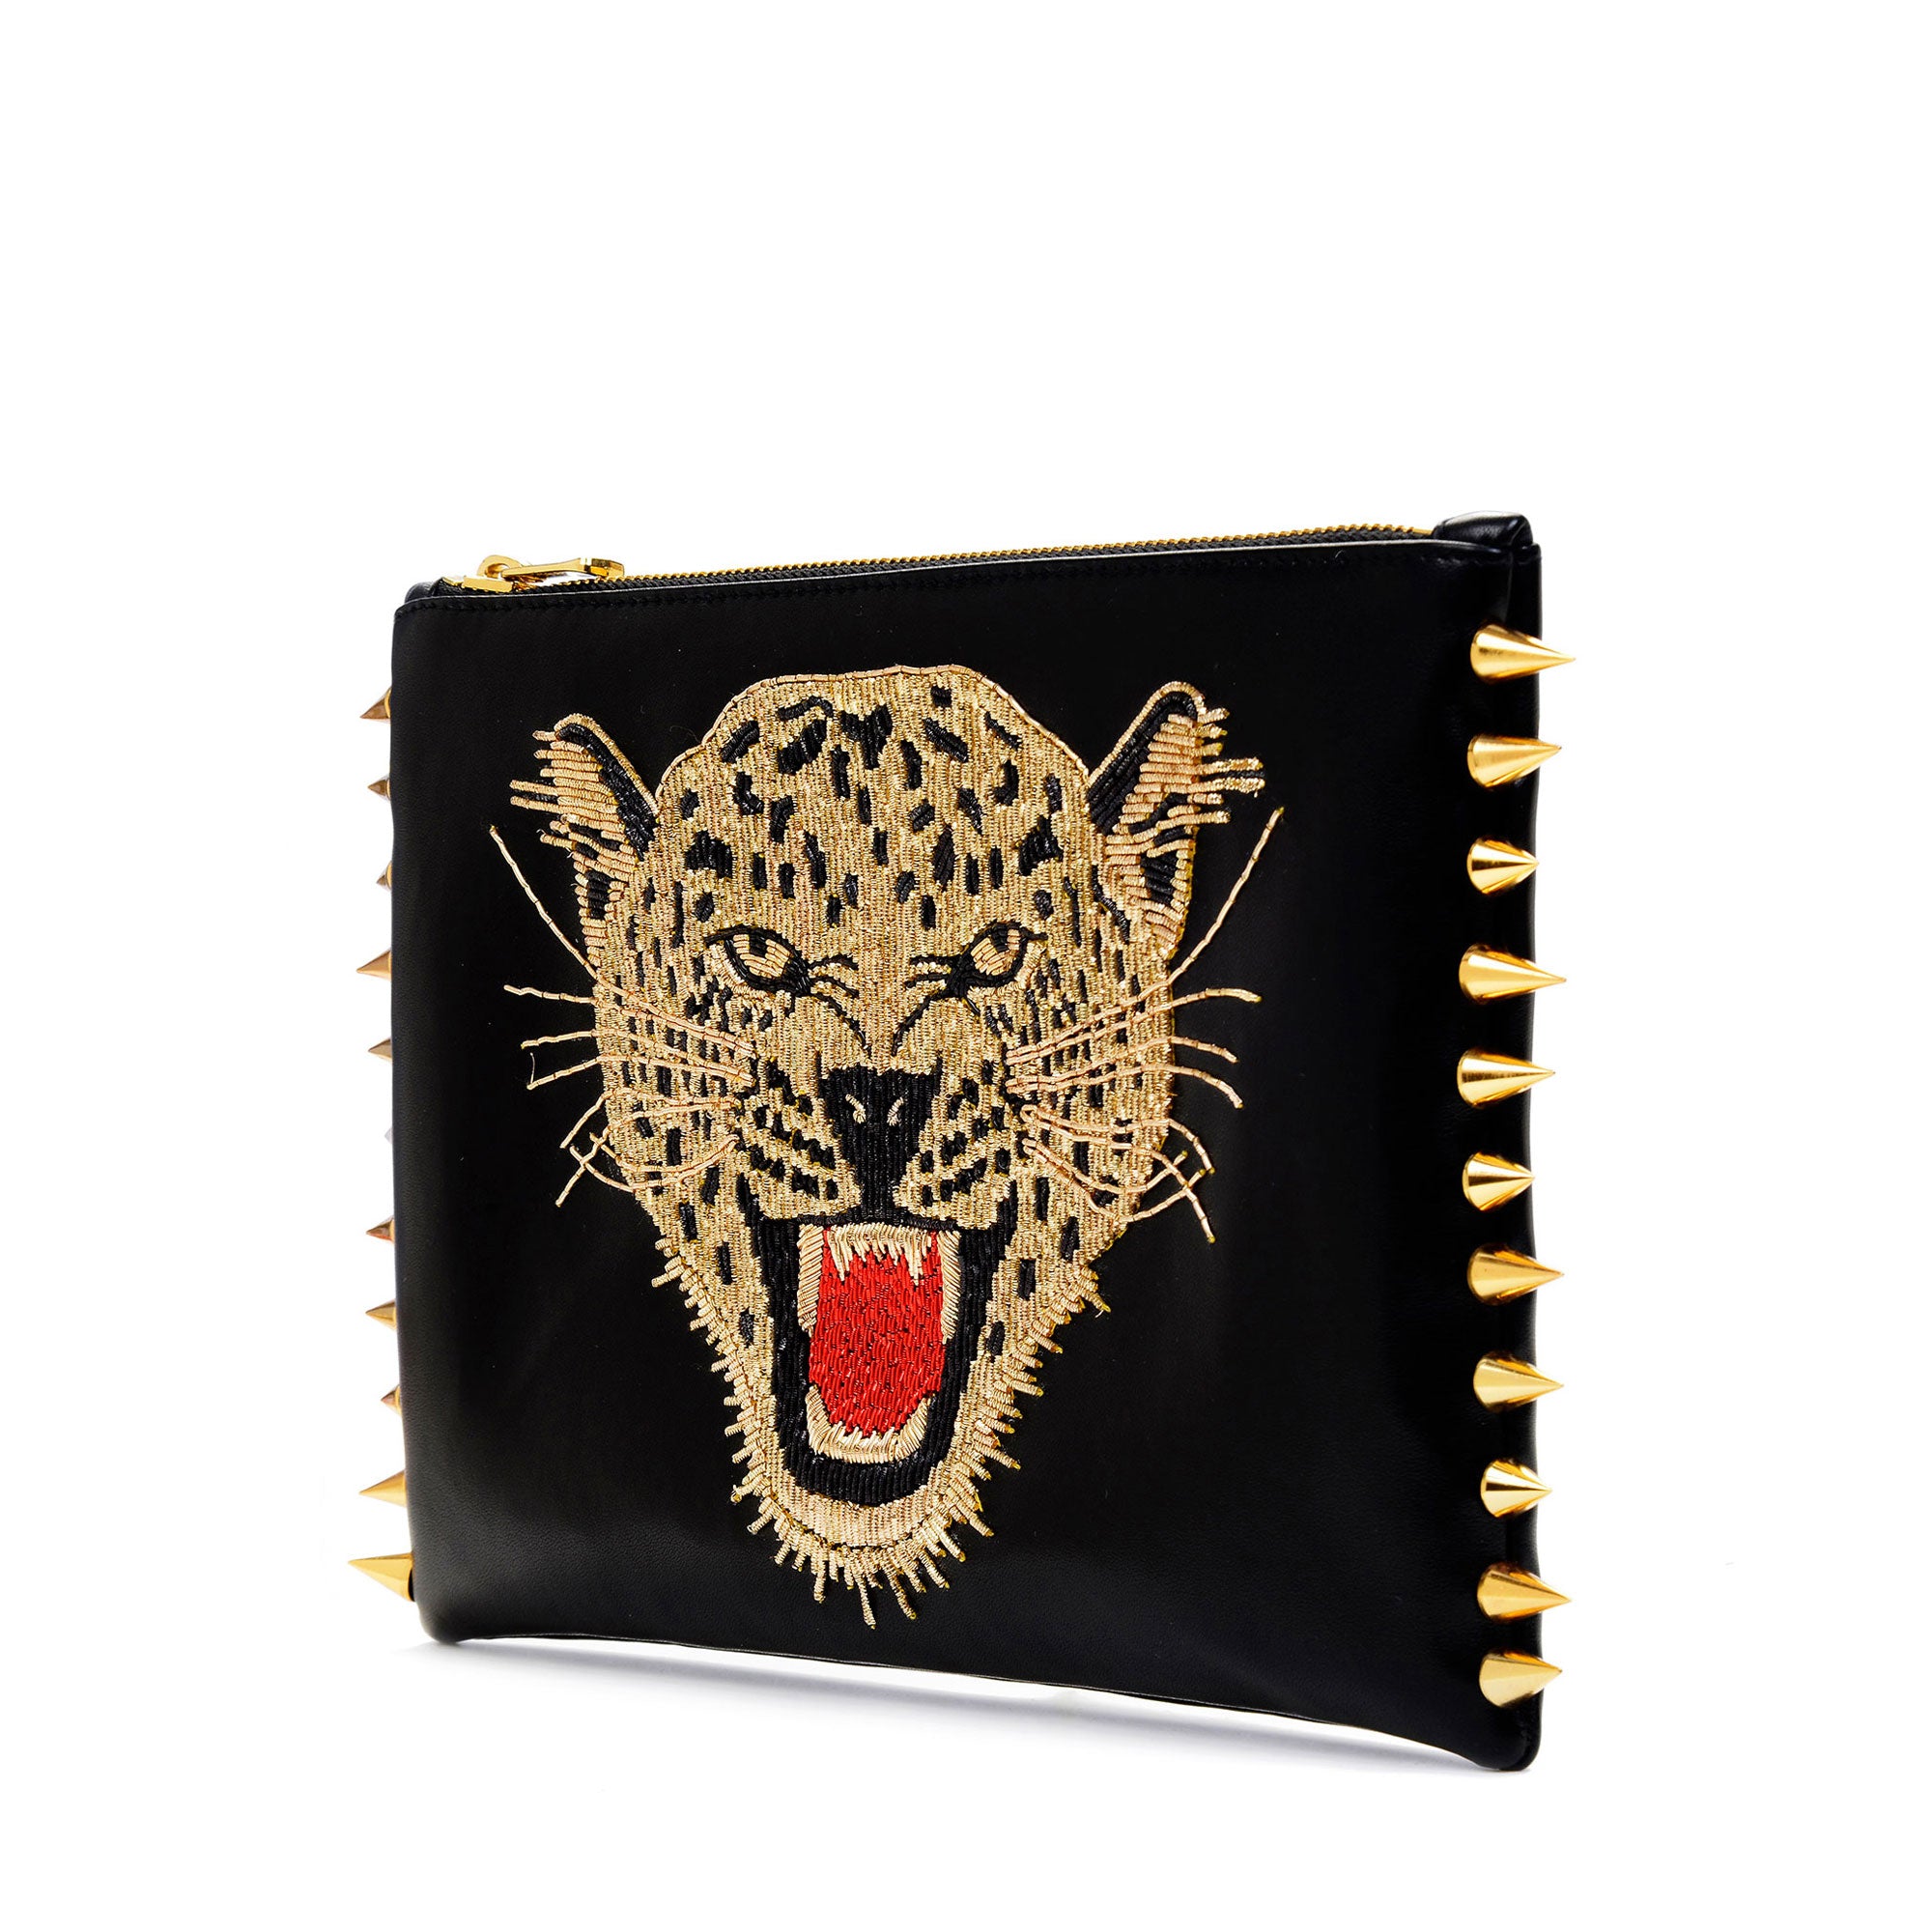 LEOPARD EMBROIDERED CLUTCH BAG(GOLD)